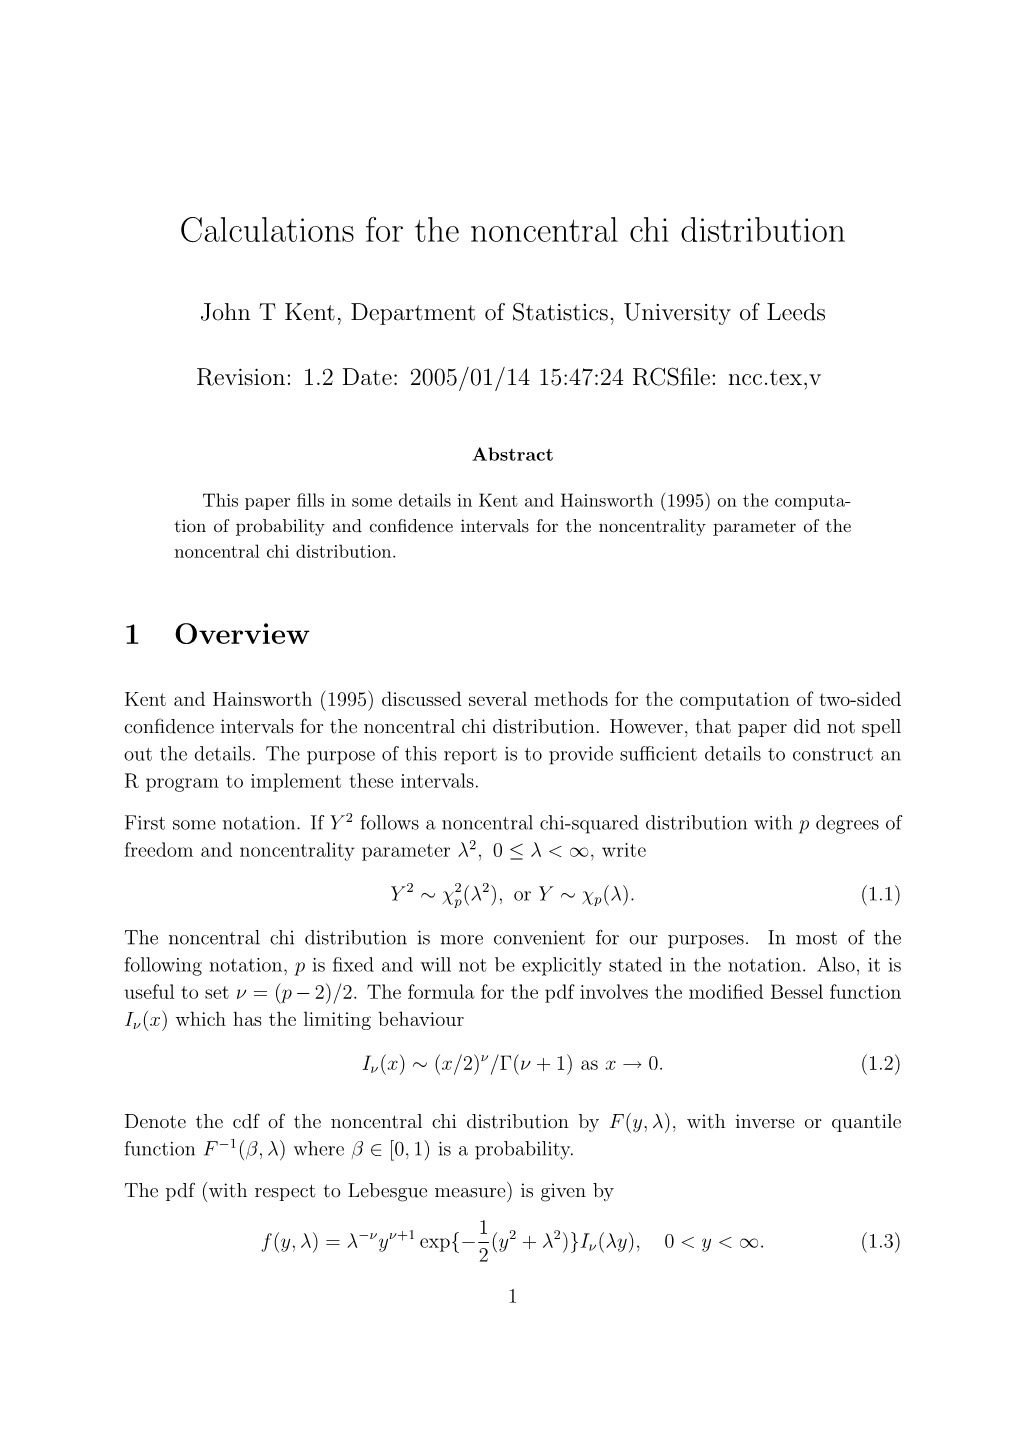 Calculations for the Noncentral Chi Distribution